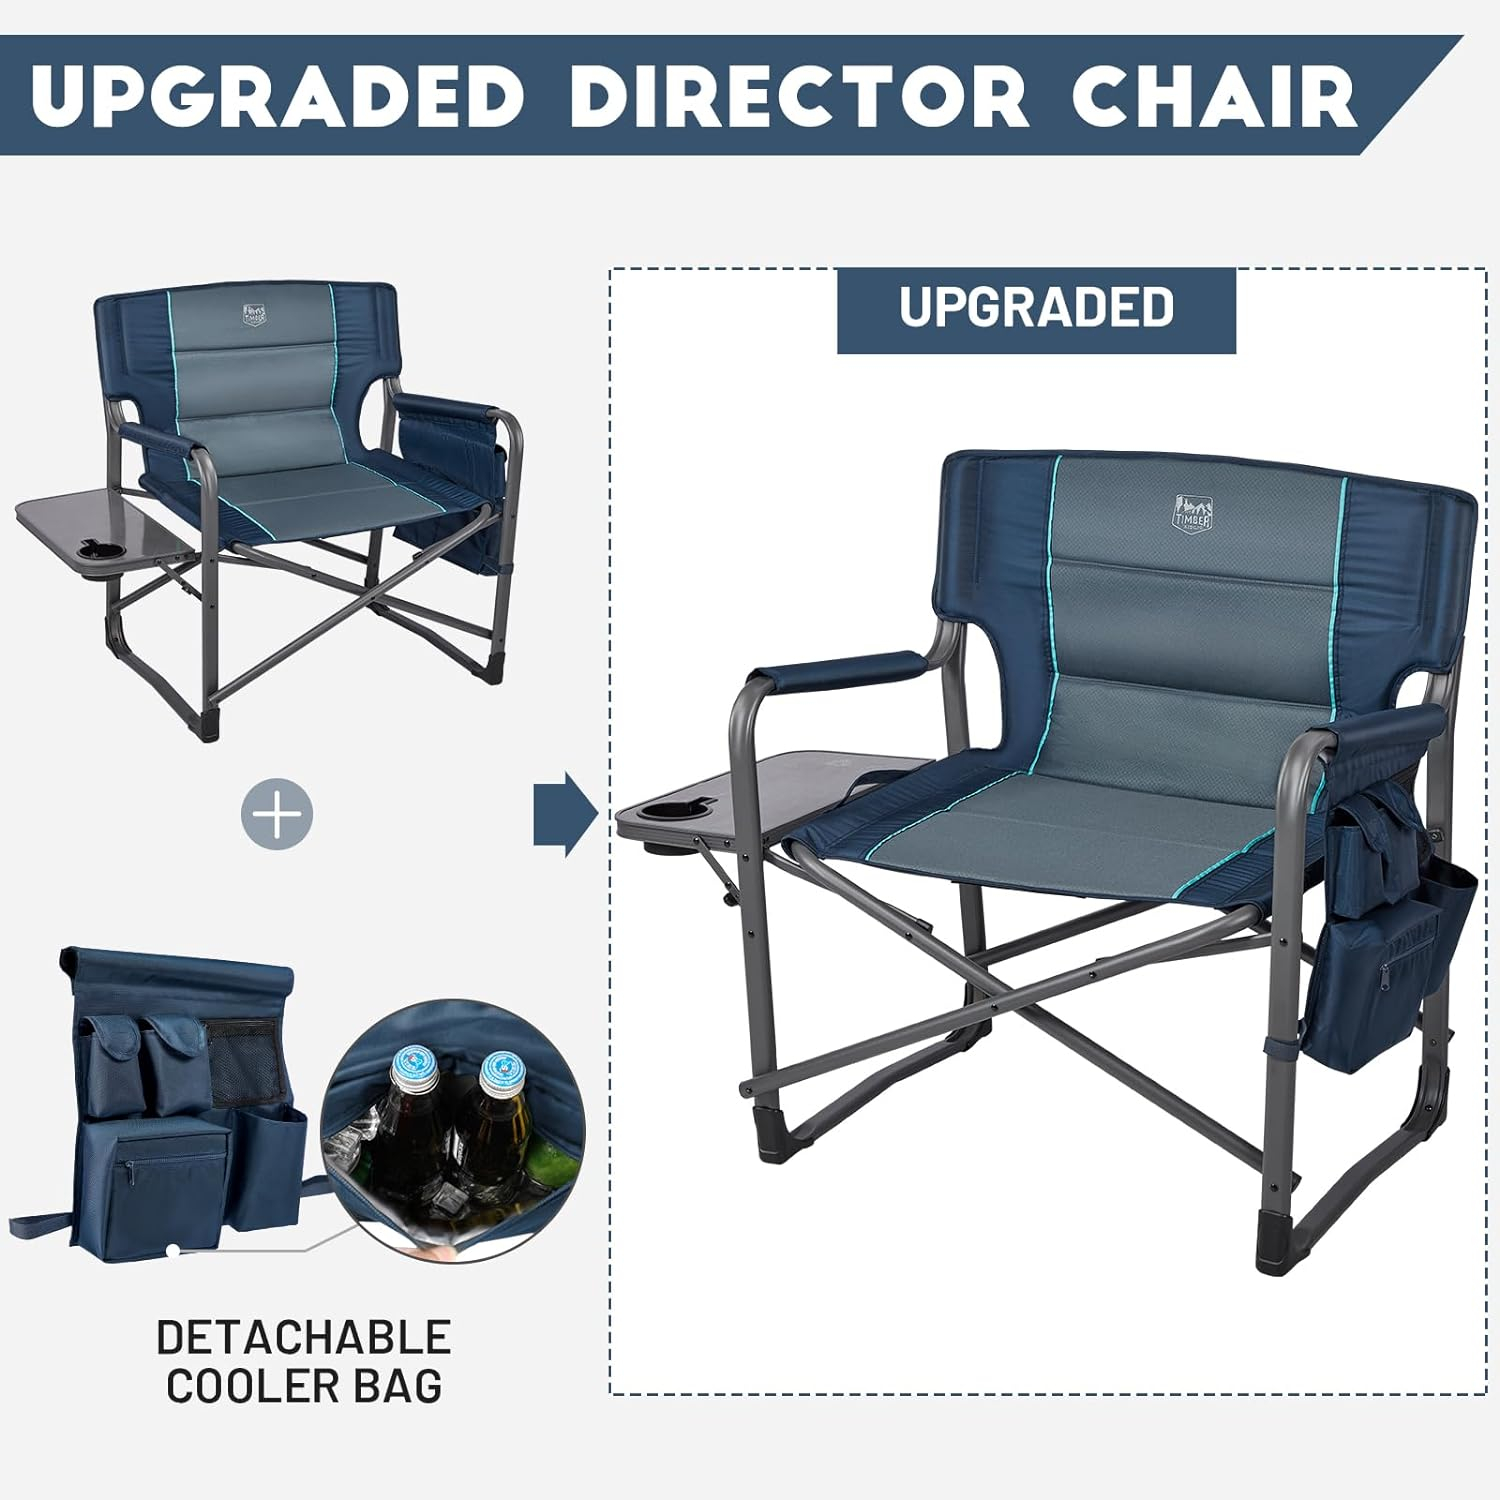 TIMBER RIDGE XXL Upgraded Oversized Directors Chairs with Foldable